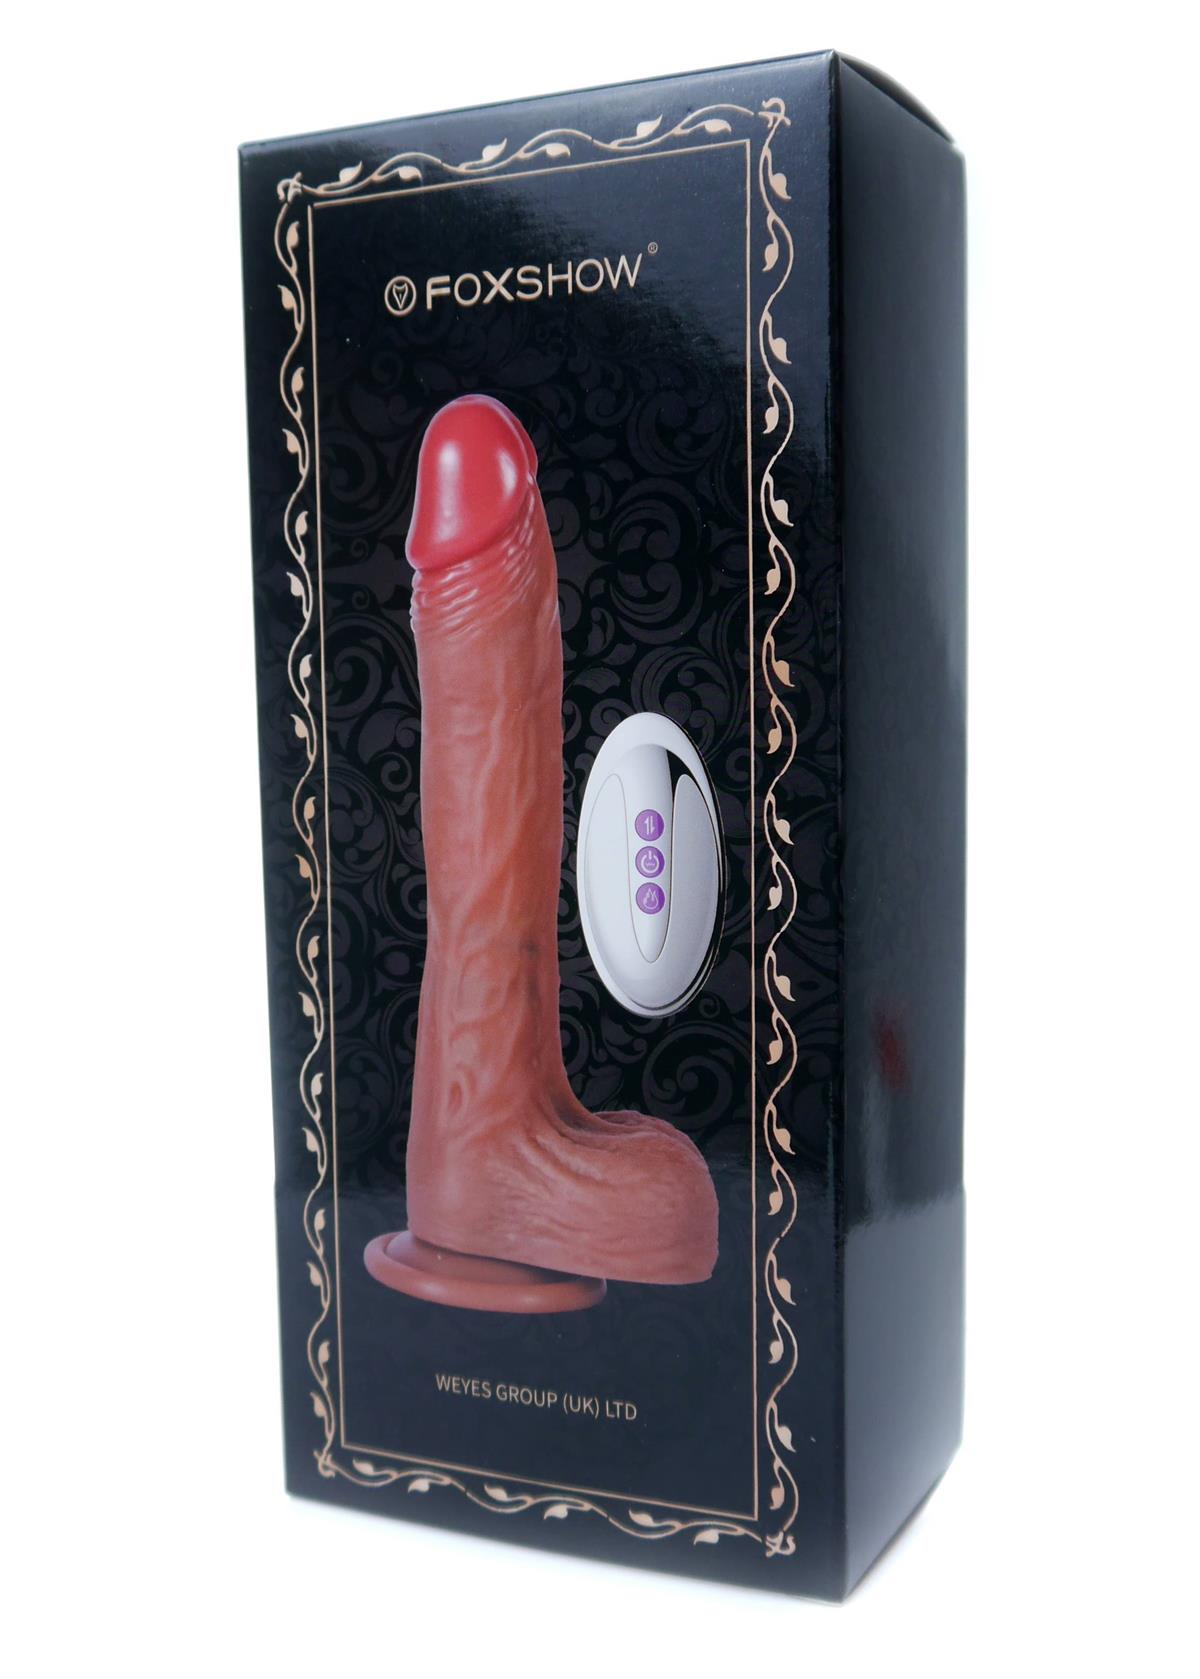 Foxshow - 63-00053 - Remote control Realistic vibrator - Up & down - Rotating - Heat function - Silicone 10 Function - 21 cm- Rechargeable - Luxury Giftbox - Flesh